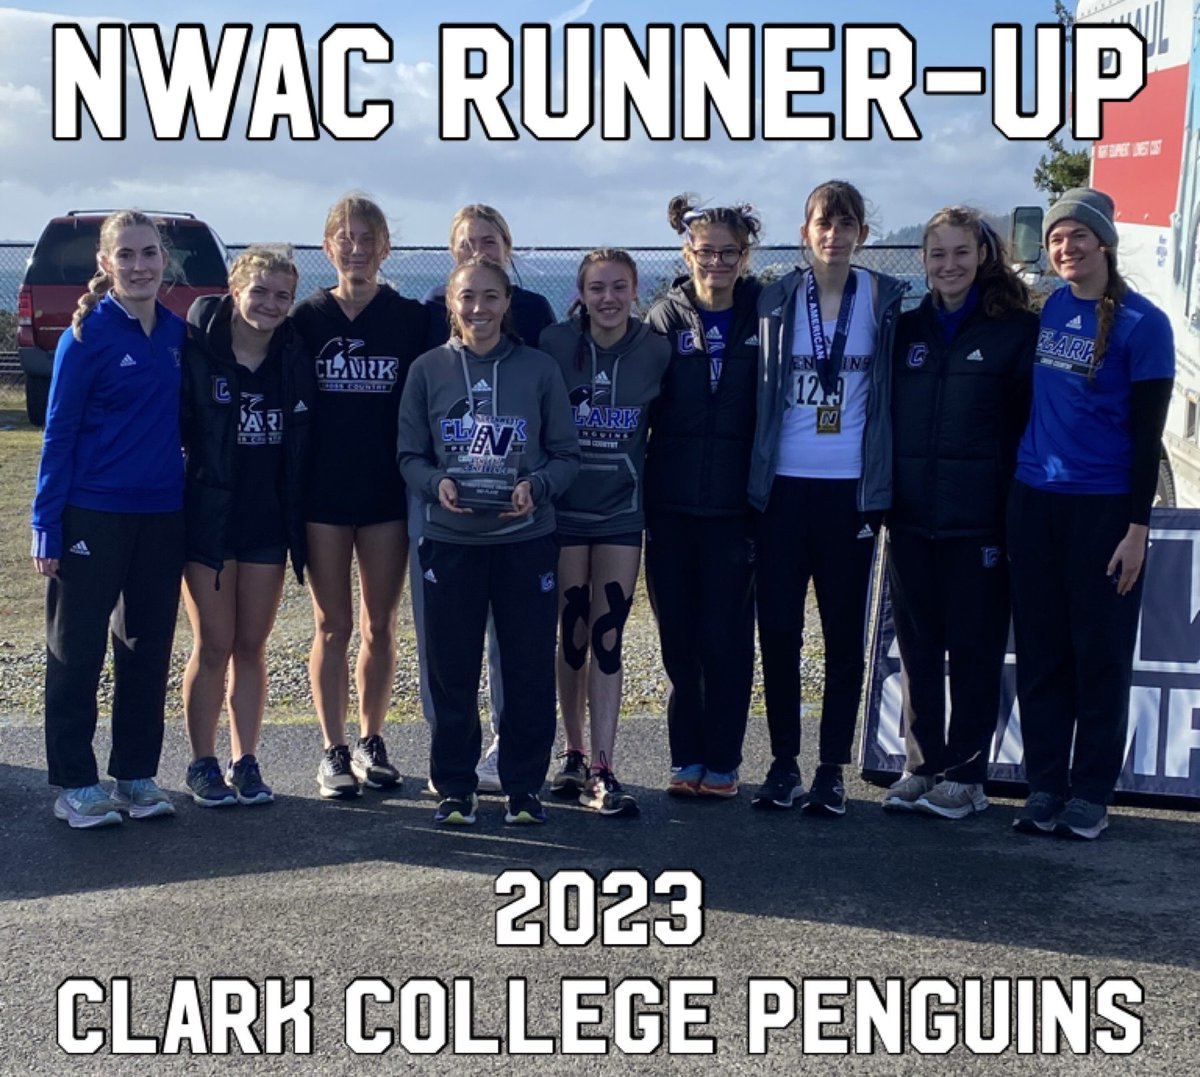 Congrats to our 2023 women’s team! Only one women’s program has finished top two in the NWAC each of the last two seasons, and it’s the 🐧s. Time to take #TheNextStep!